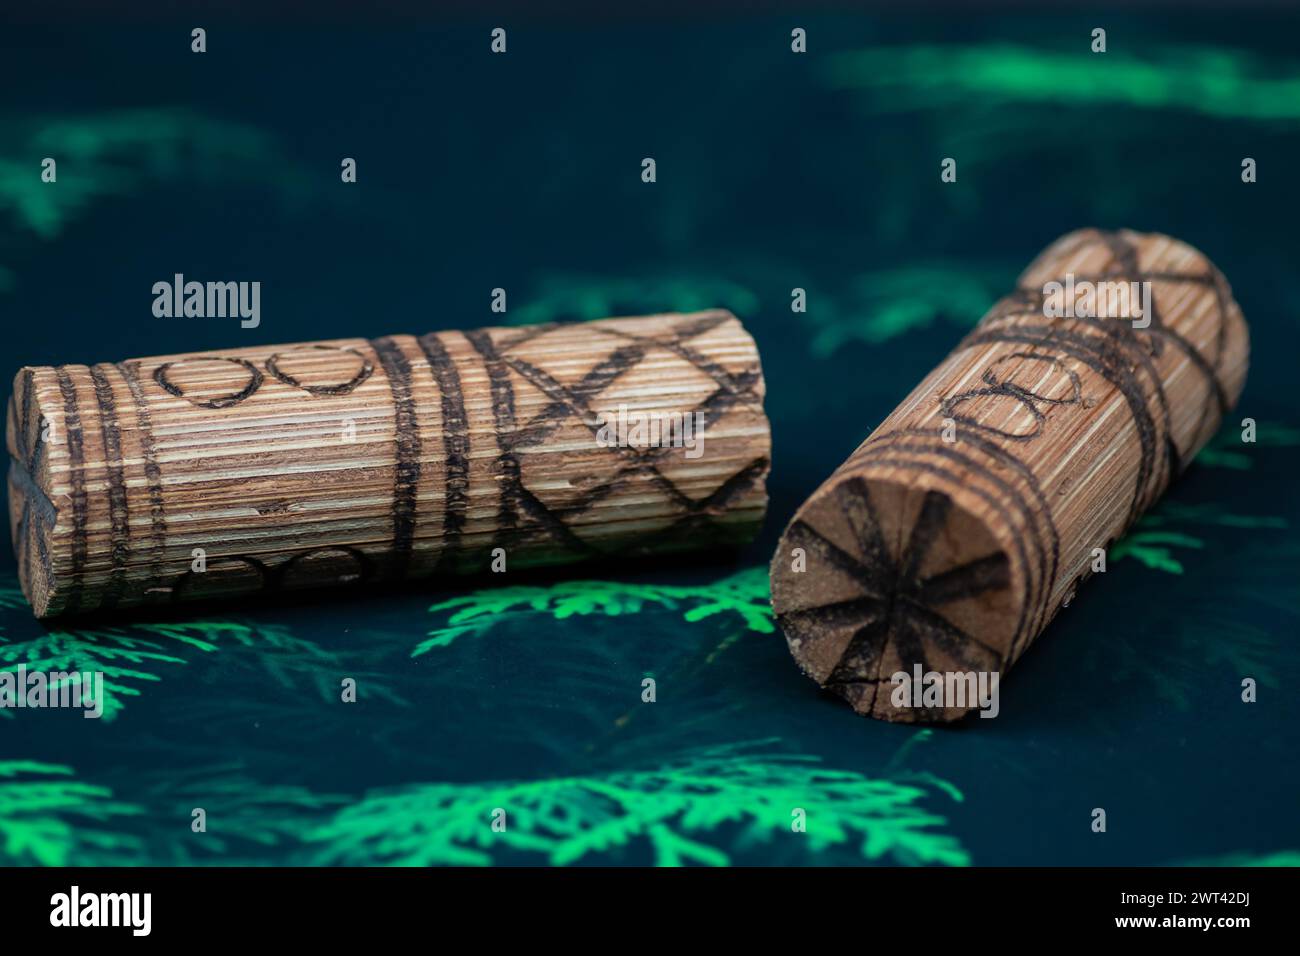 Musical traditional ethnical and tribal rhythmic idiophones made of wood with some grains or send inside, when shacked makes rhythmic sounds Stock Photo